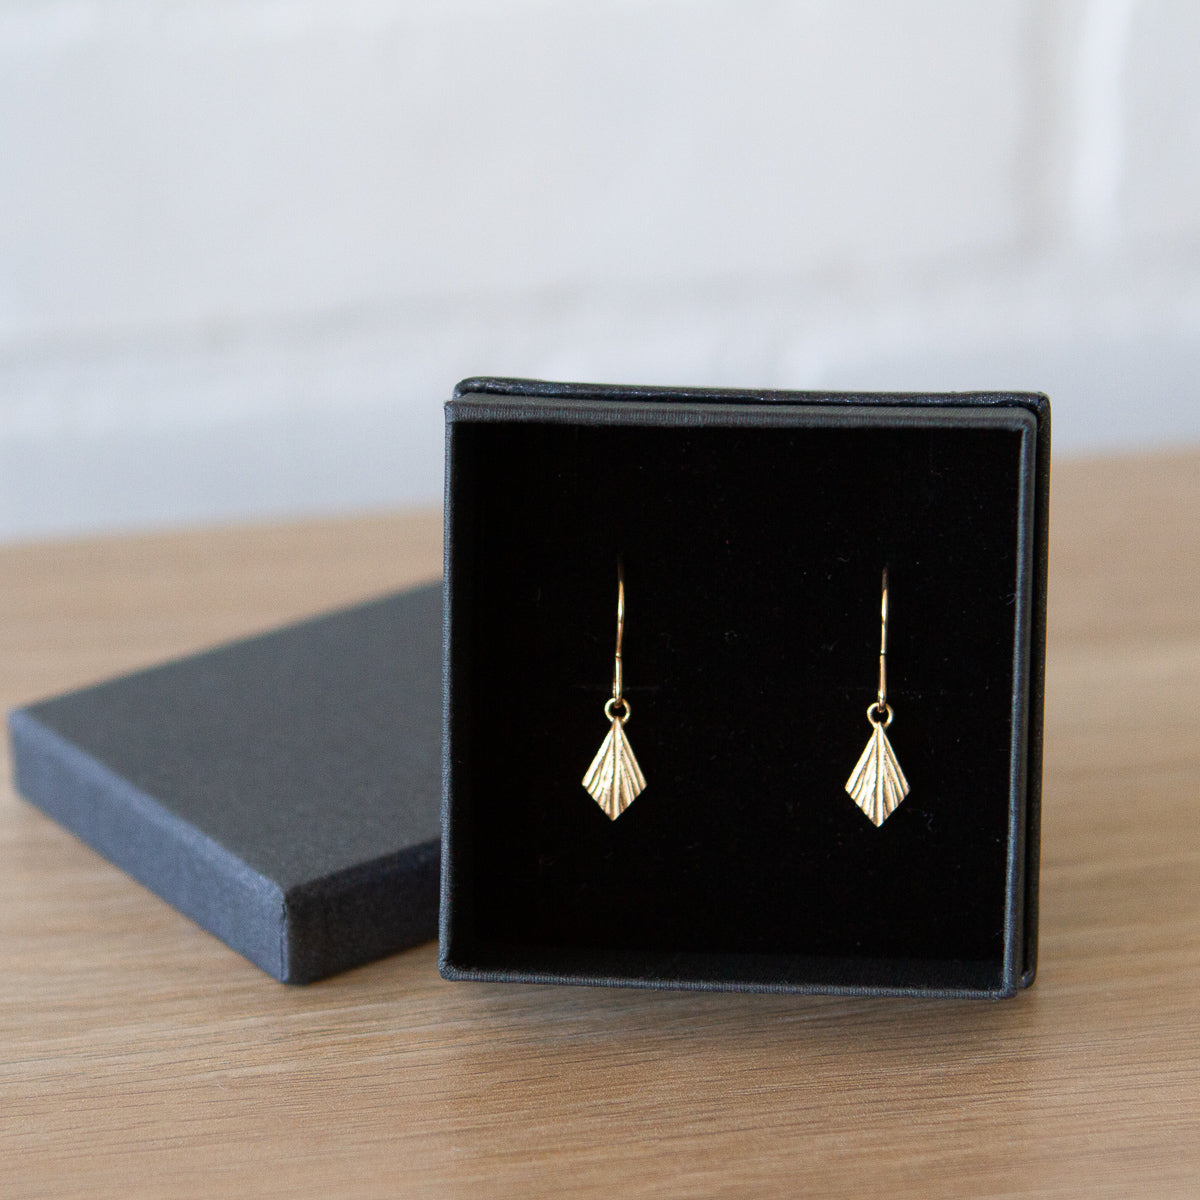 Gold Flame Earrings by Corey Egan in a gift box